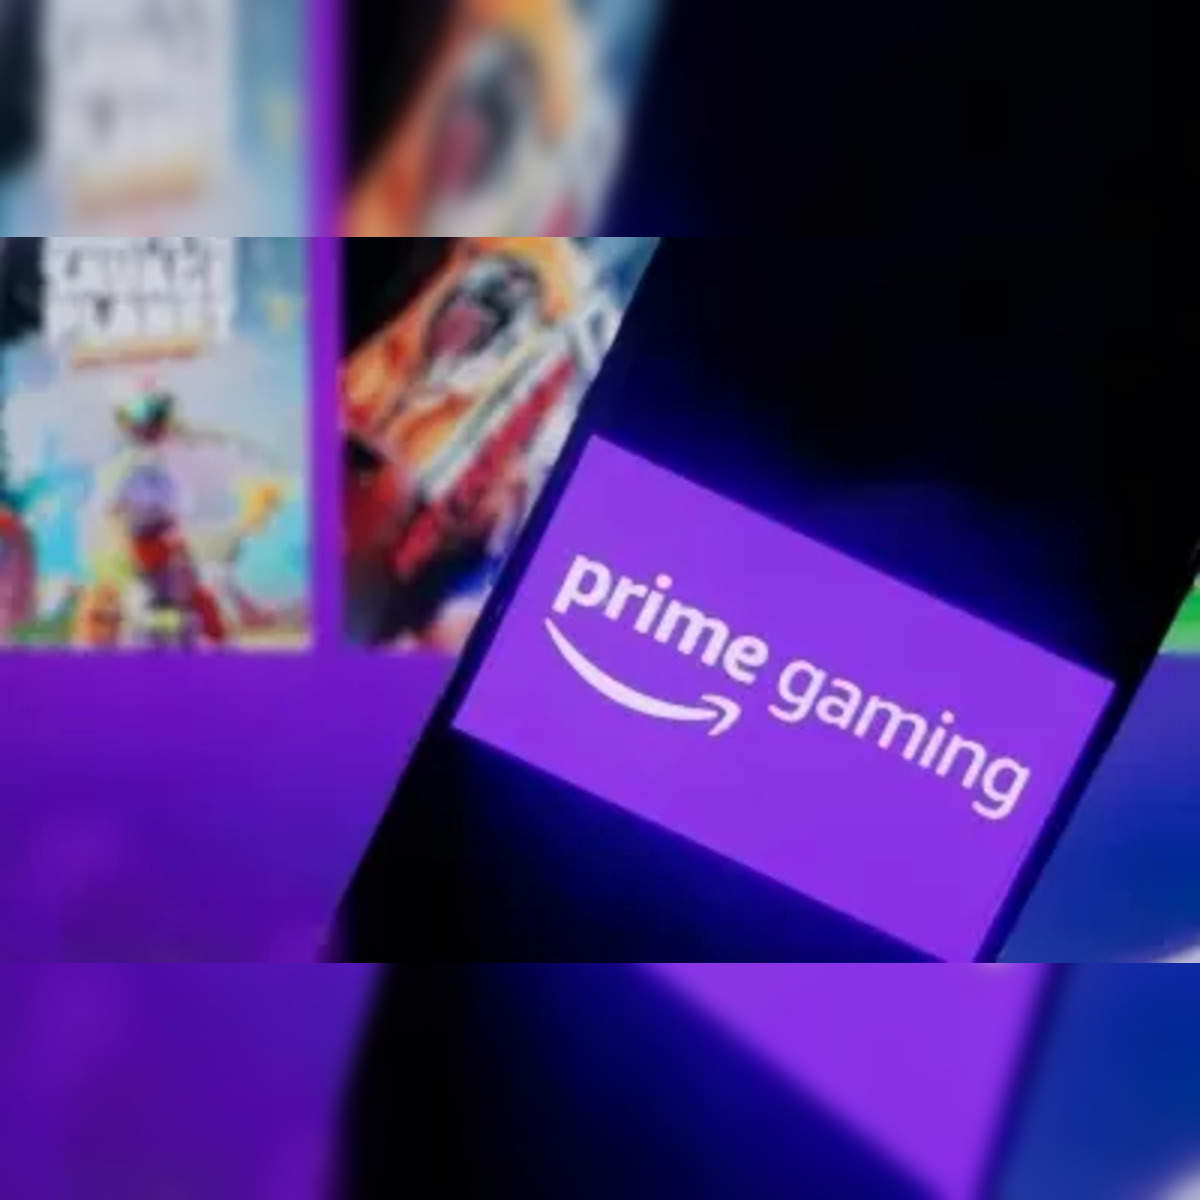 Prime gaming is now available in India - Neowin